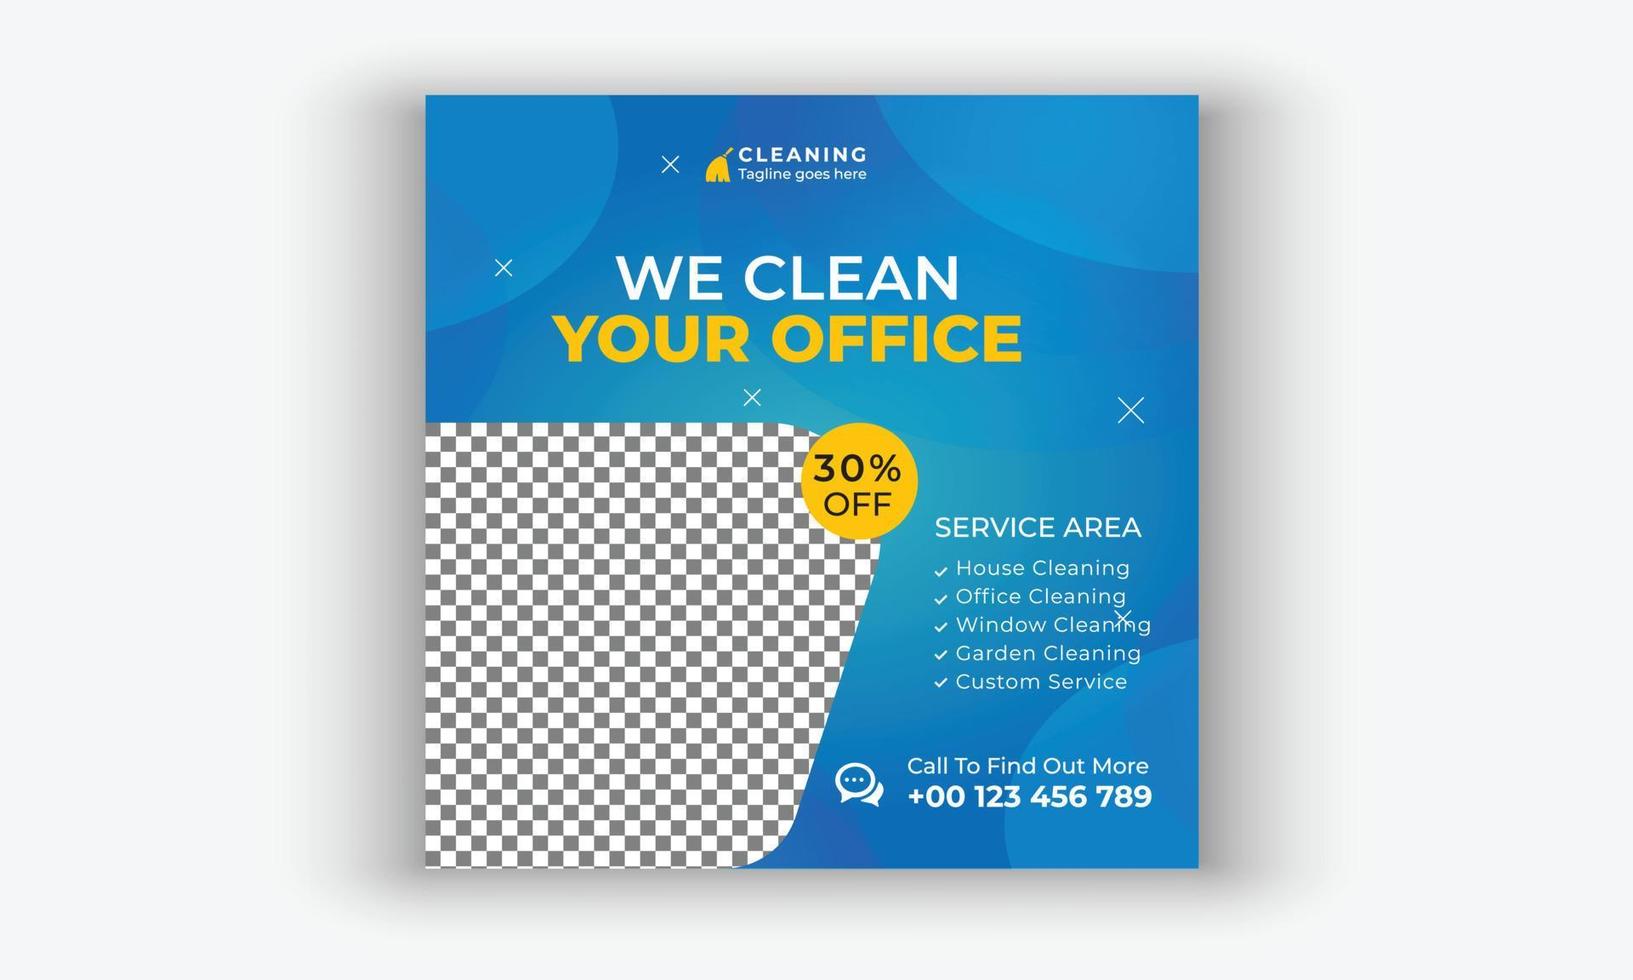 office, home and hotel cleaning social media post banner. Cleaning service social media post banner template. Home Cleaning social media post banner. Cleaning service marketing post banner design. vector